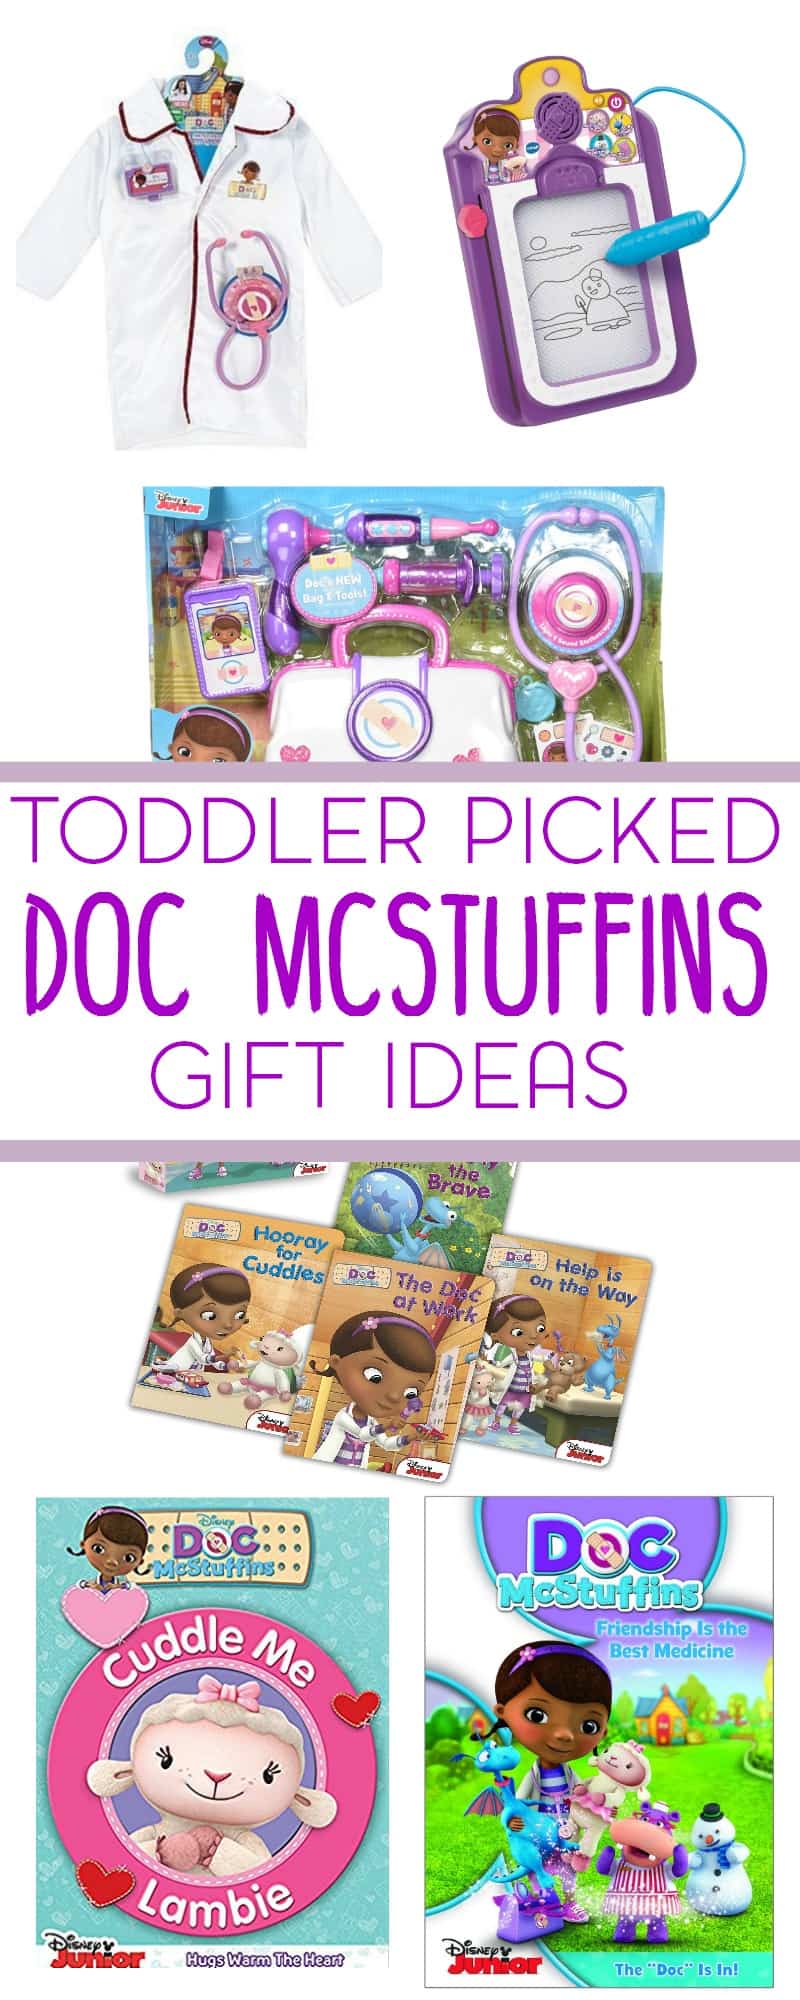 doc-mcstuffins-gift-ideas-as-picked-by-a-toddler